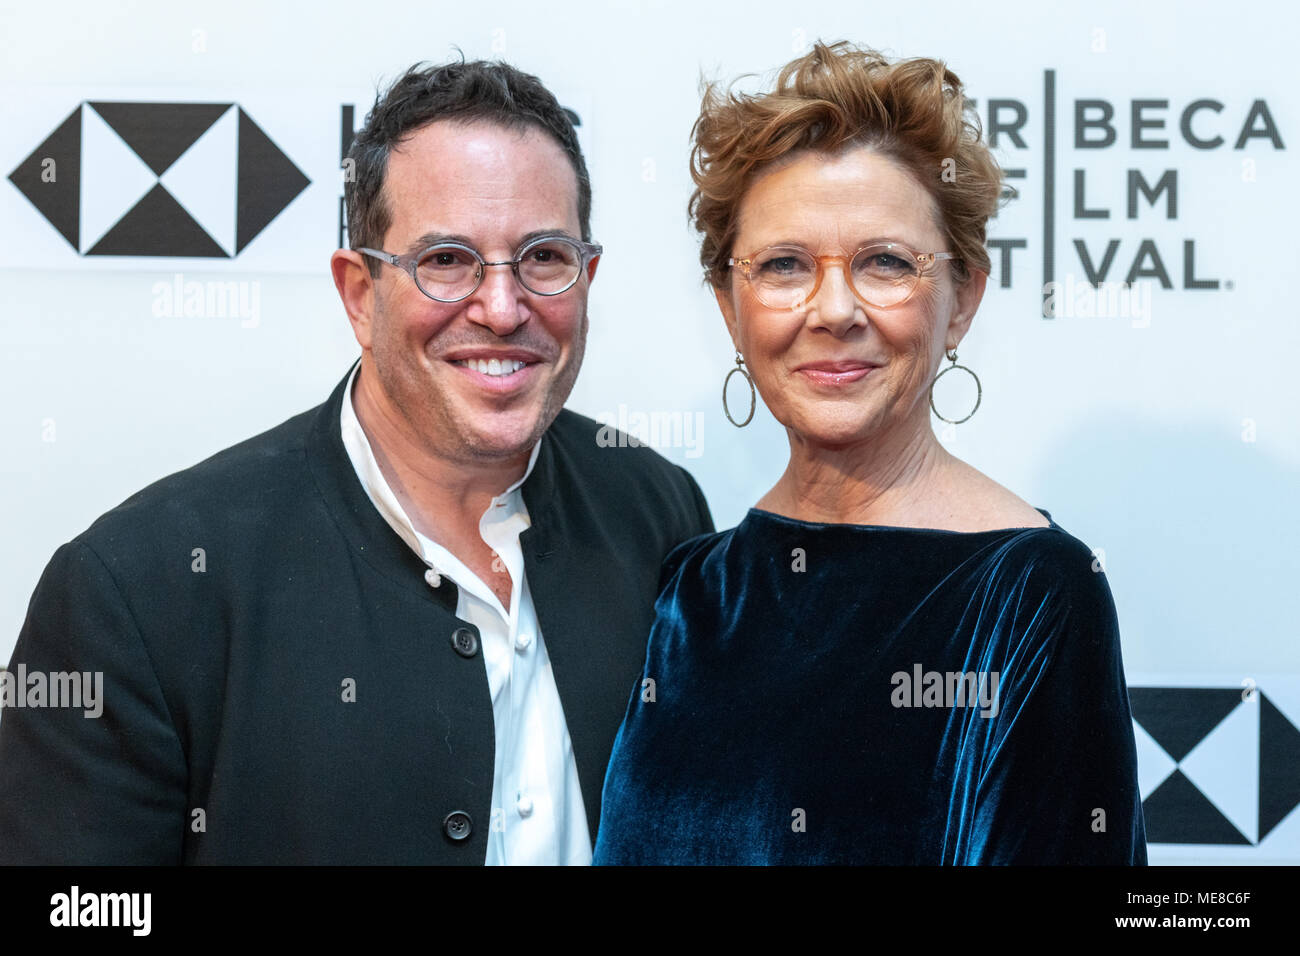 New York, USA, 21 April 2018. Actor Annette Bening and Director Michael Mayer attend the premiere of 'The Seagull' at the 2018 Tribeca Film Festival in New York city.  Photo by Enrique Shore /Alamy Live News Stock Photo